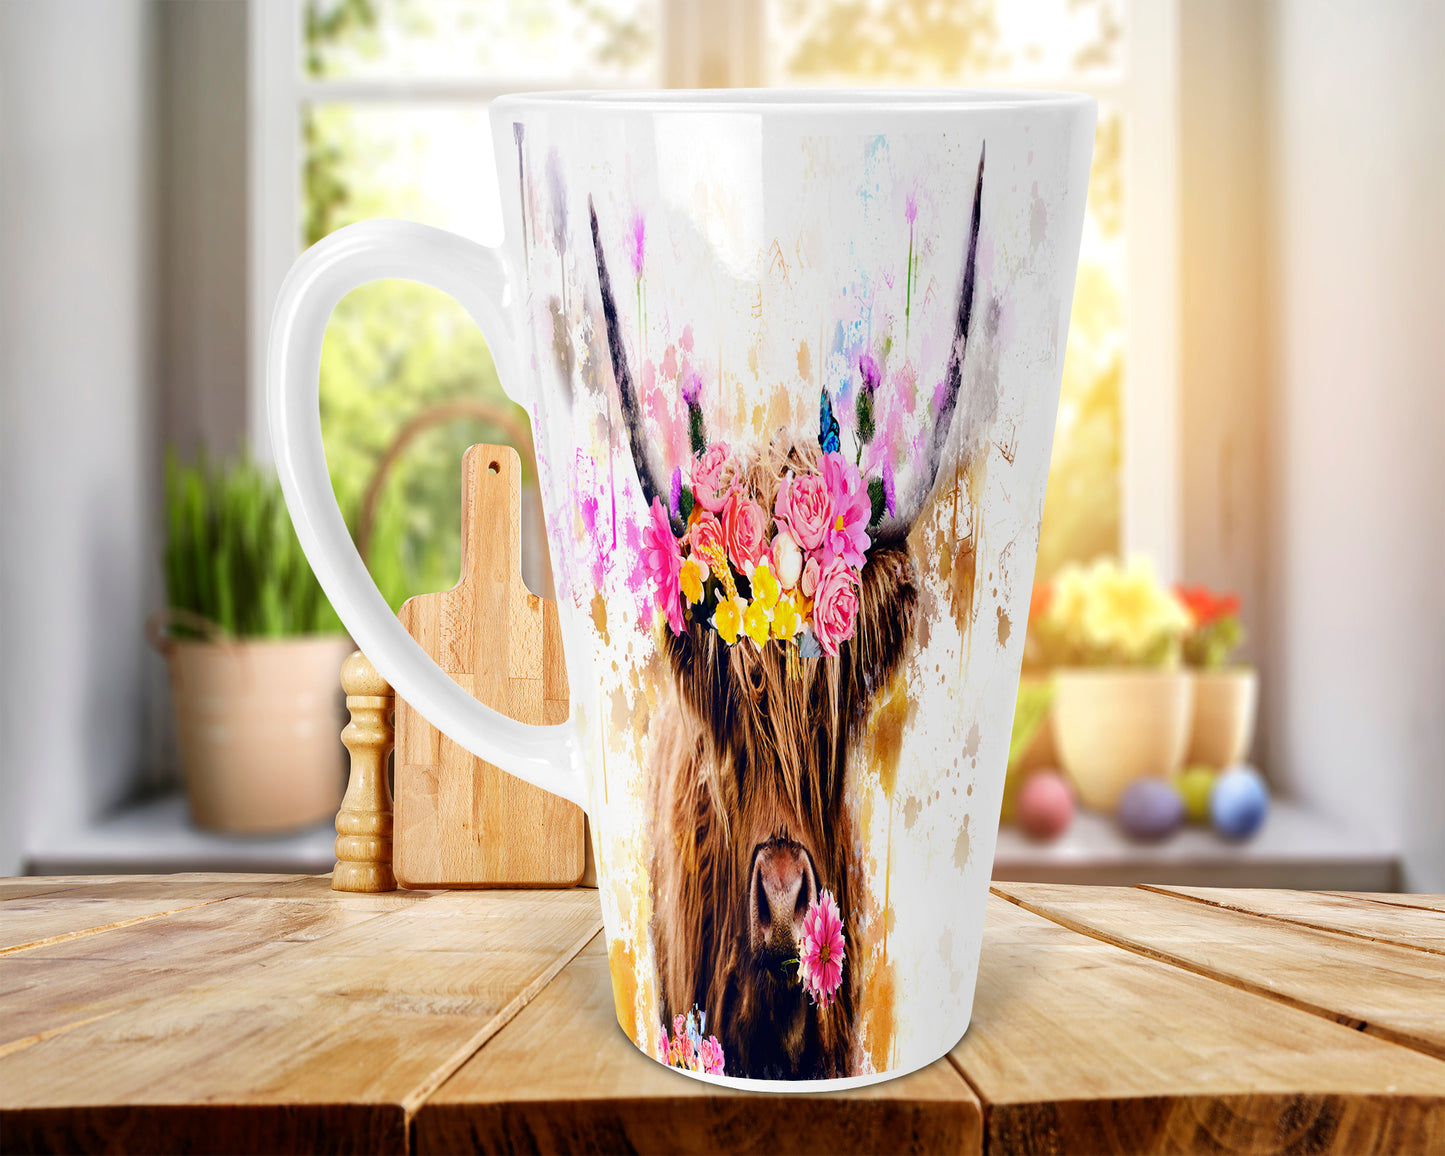 Highland Cow & Flowers 17oz Skinny Latte Coffee Mug, Highland Cow Latte Mug, Scottish Latte Mug, Highland Cows, Scottish Gift, Made In Scotland